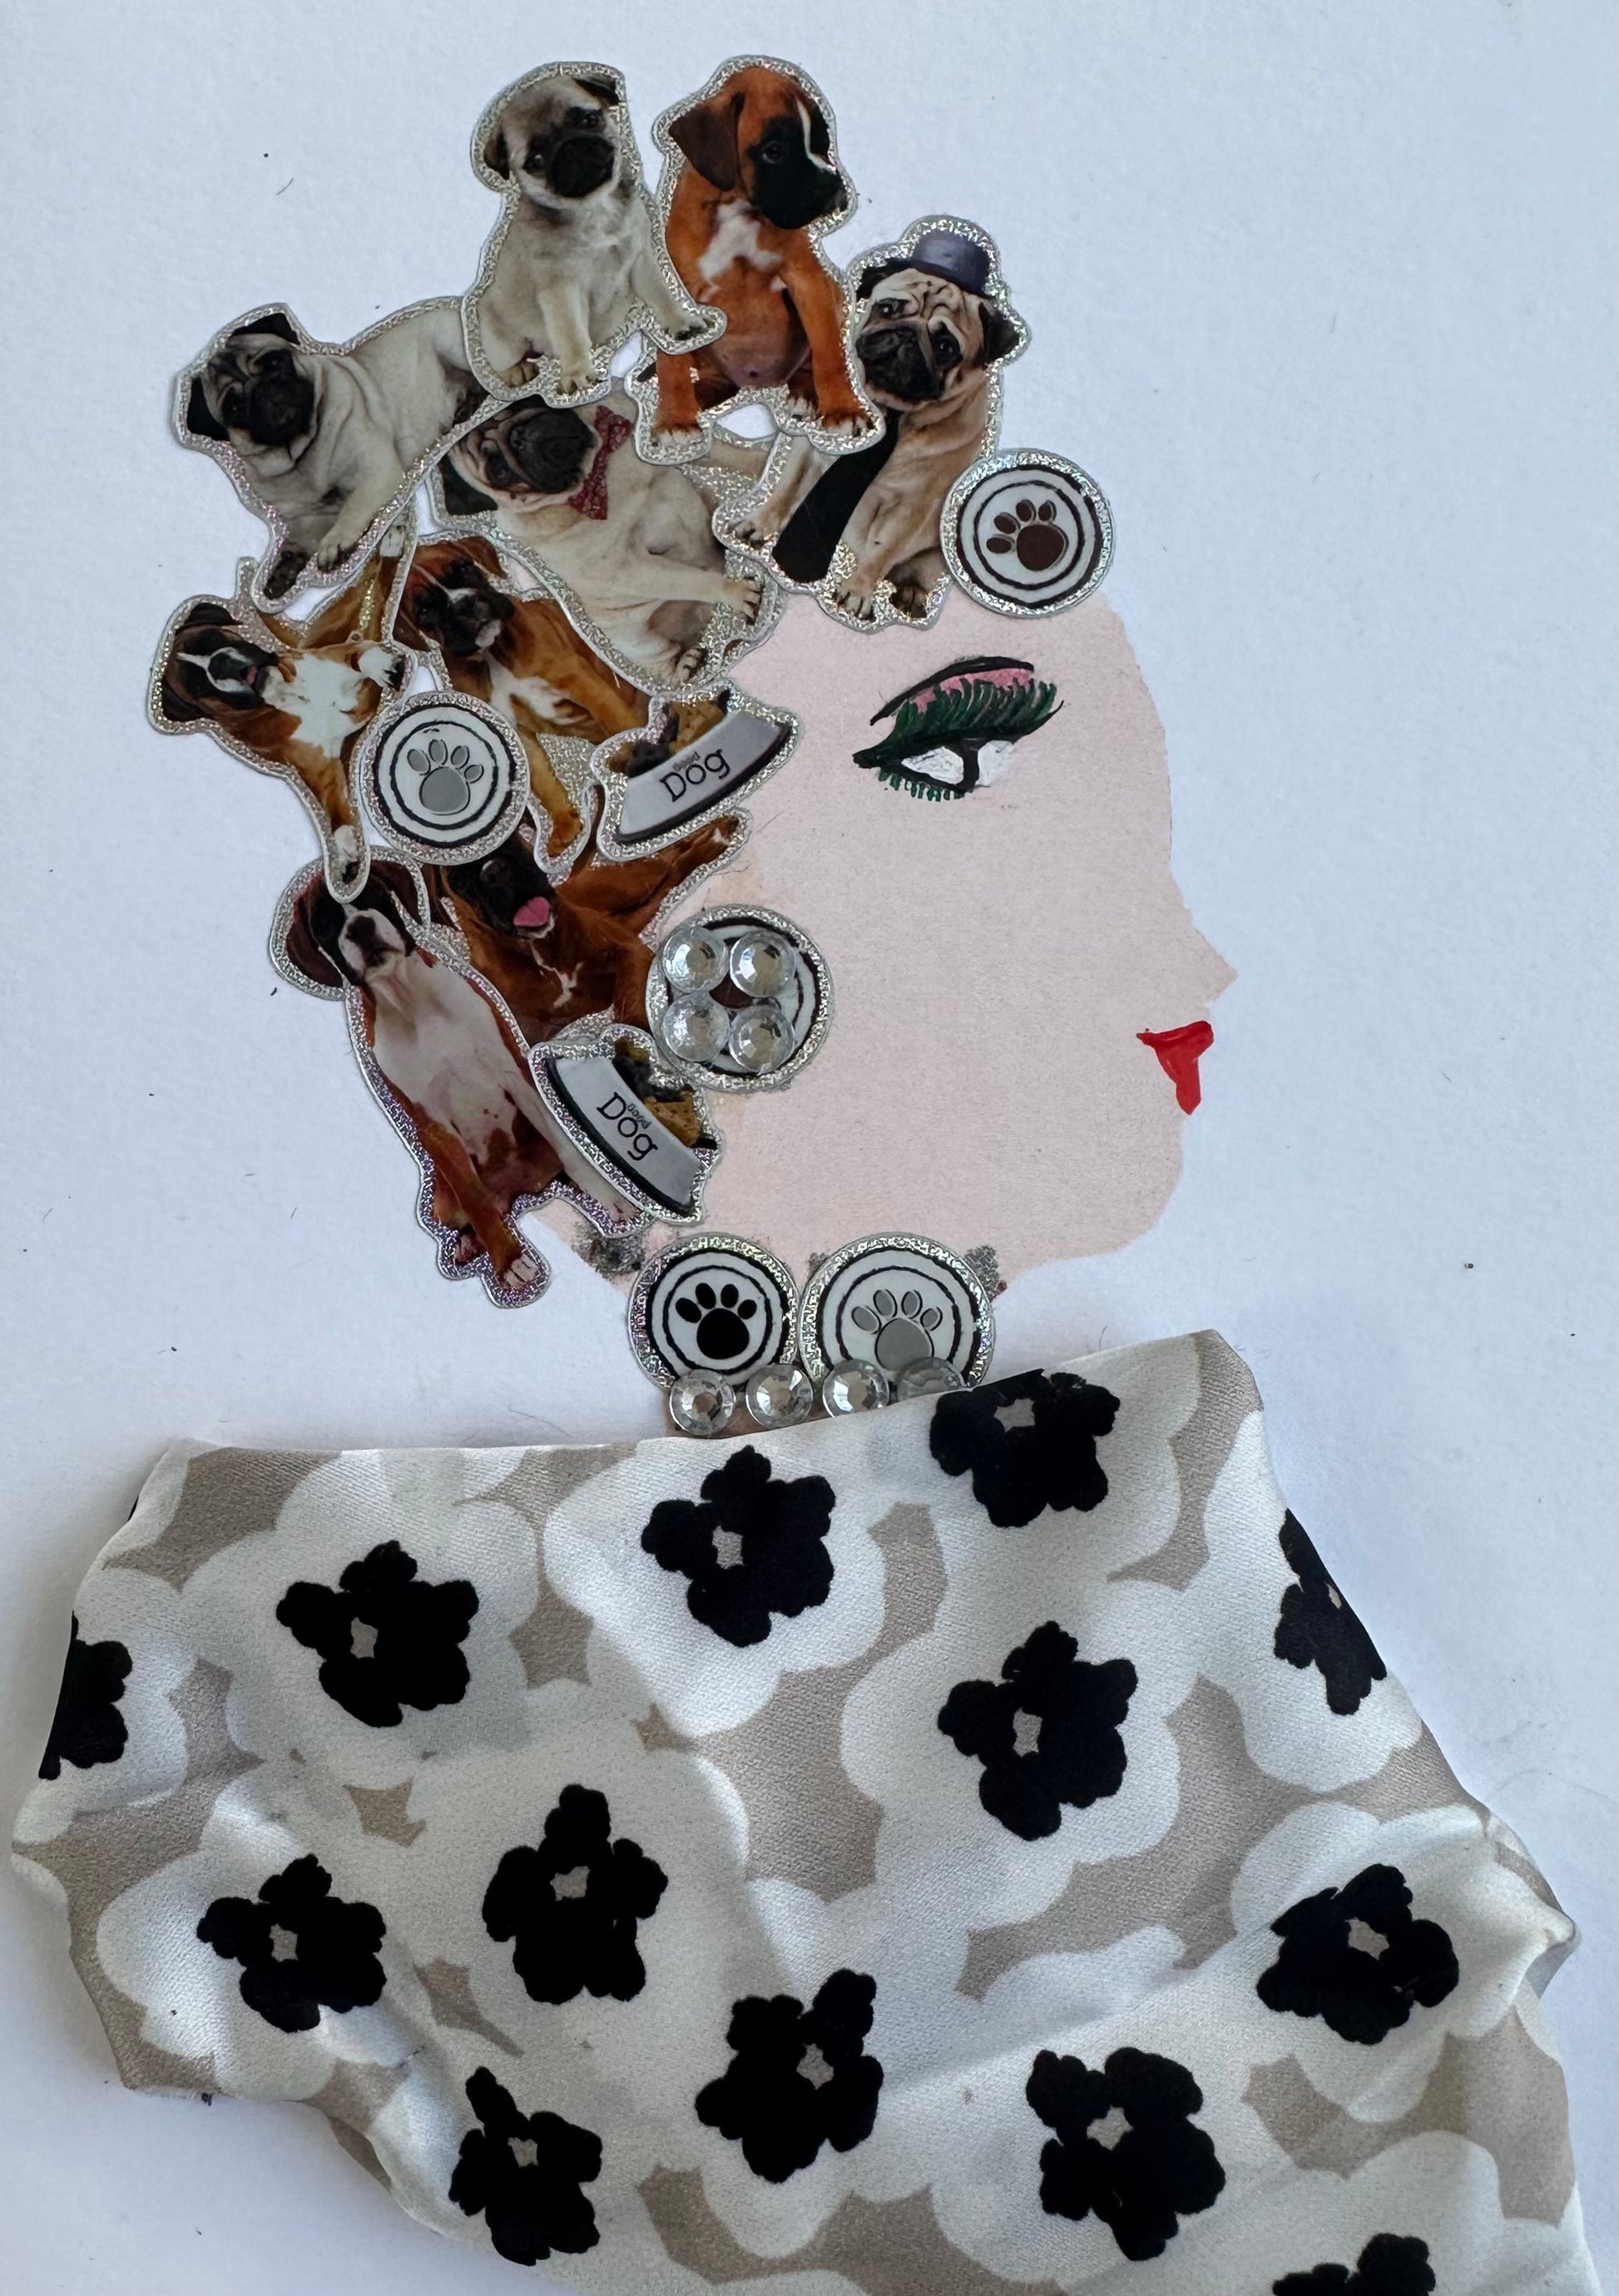 I designed this handmade card of a woman named Northwood Nancy. She is dressed in a beige, black, and white floral blouse. Her hatinator is composed of many pictures of different dogs, and her jewellery has paw prints on it.